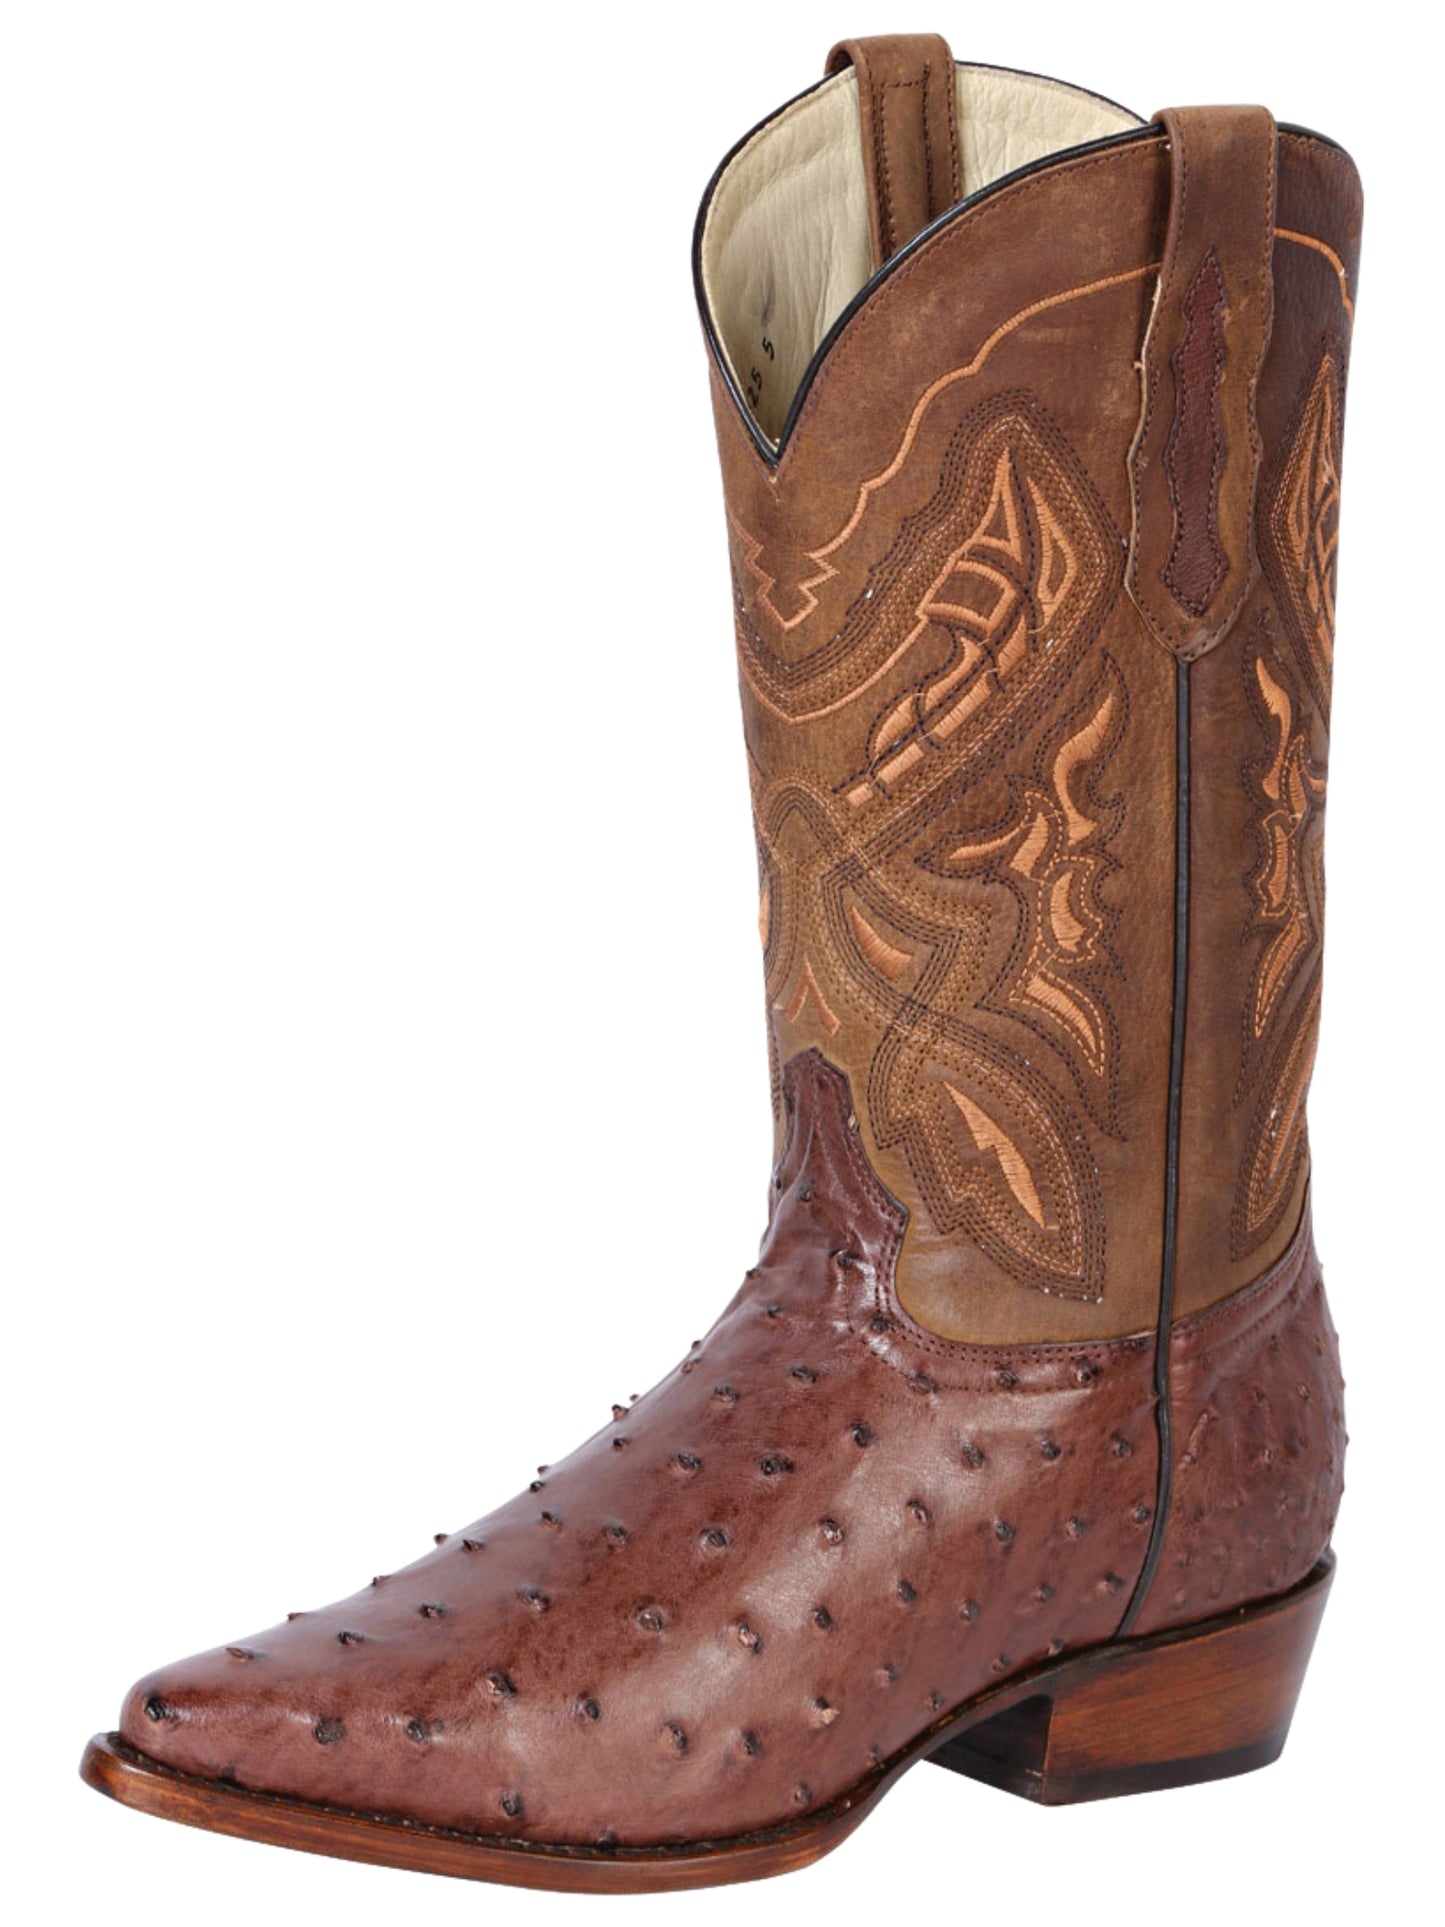 Original Ostrich Exotic Cowboy Boots for Men '100 Years' - ID: 42767